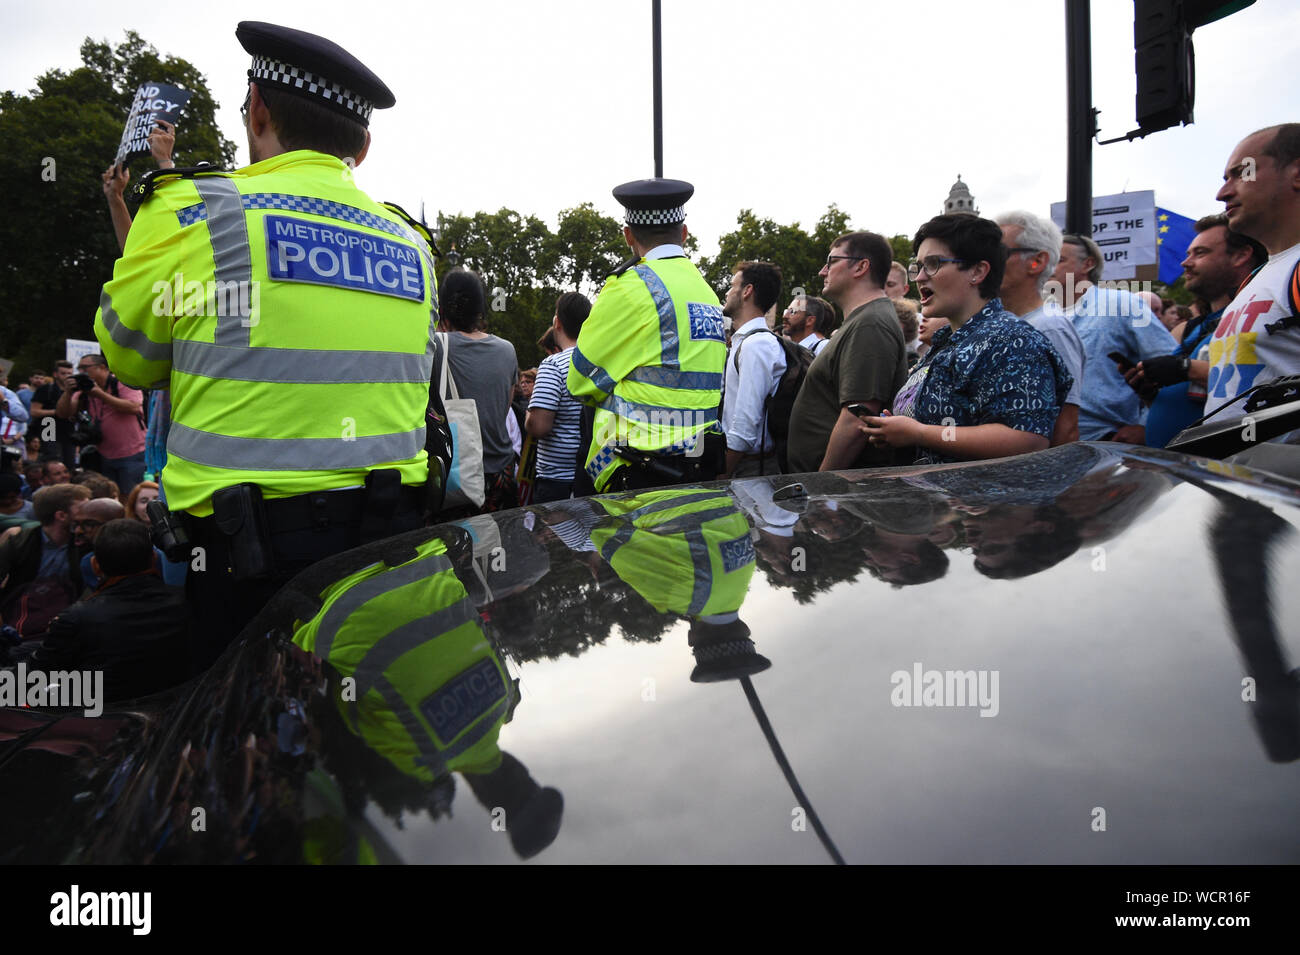 Protesters stop traffic outside the Houses of Parliament, London, as they demonstrate against Prime Minister Boris Johnson temporarily closing down the Commons from the second week of September until October 14 when there will be a Queen's Speech to open a new session of Parliament. Stock Photo